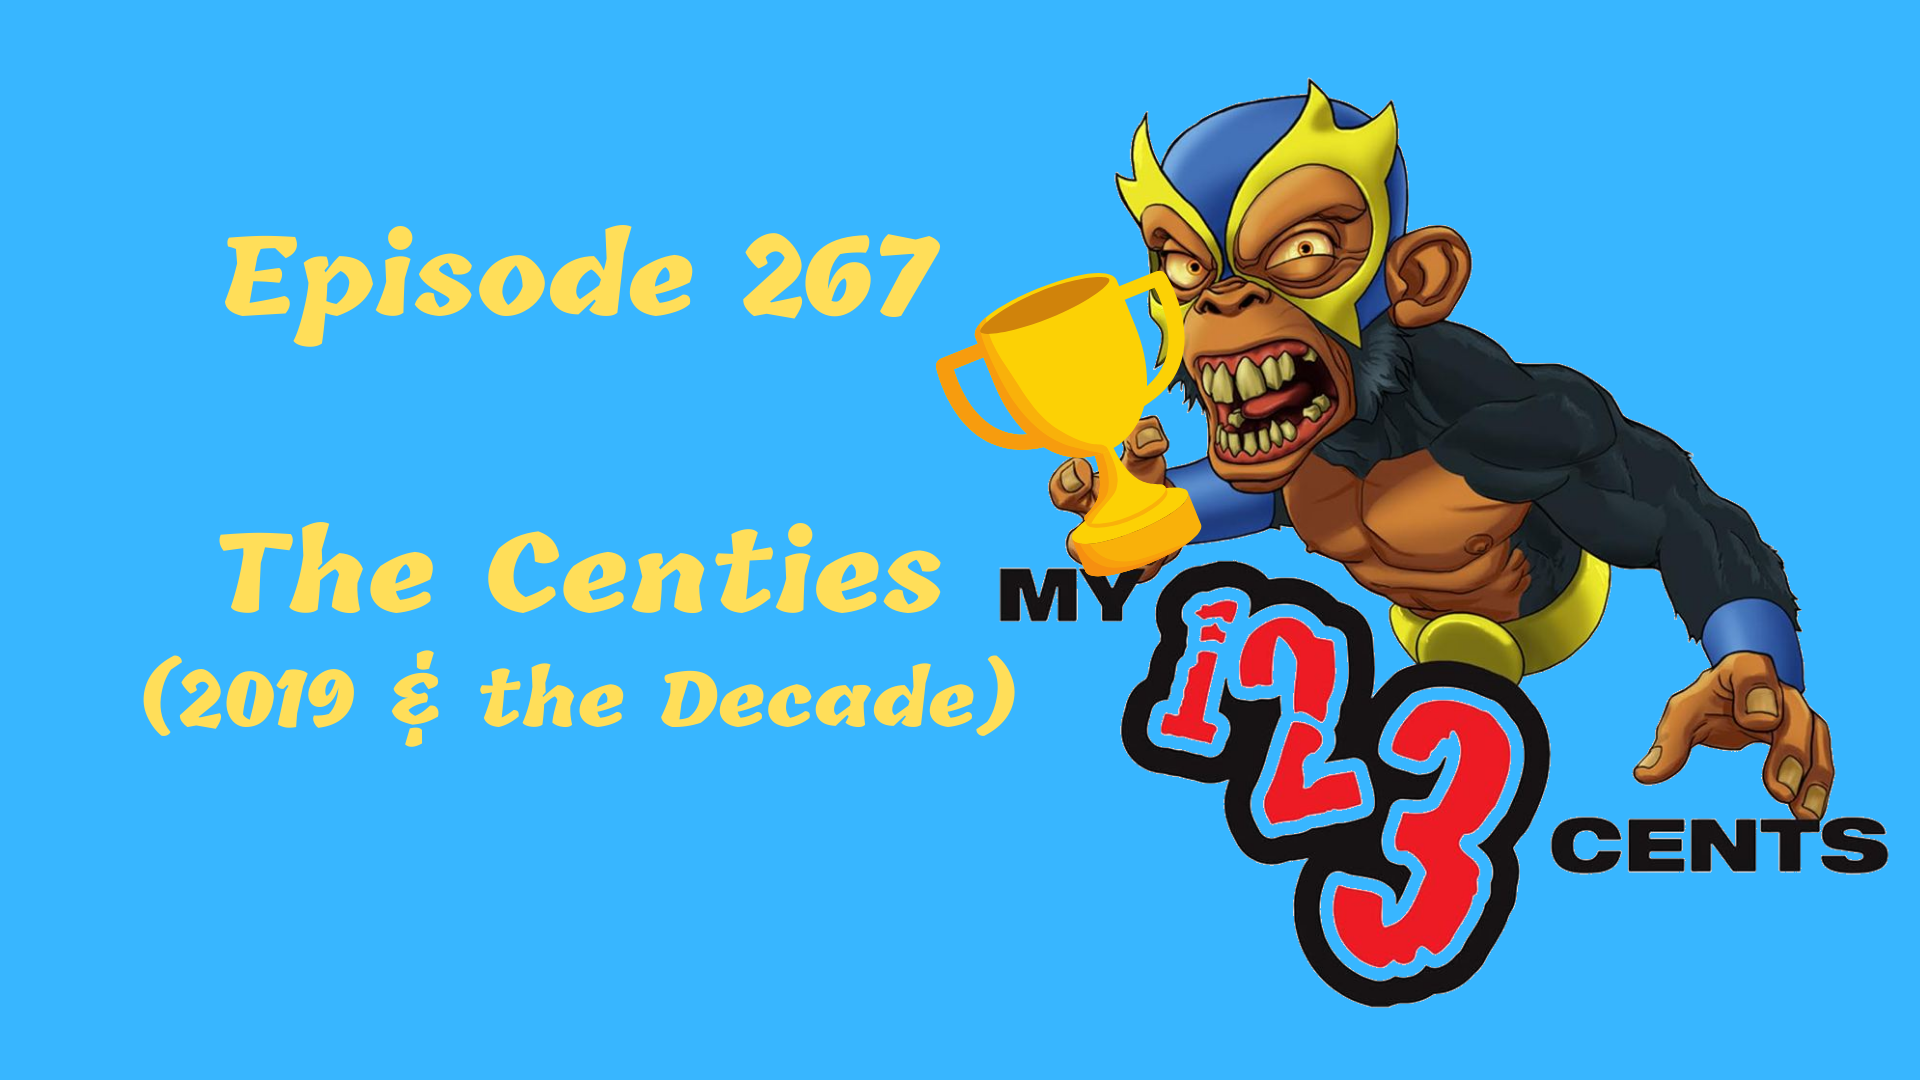 My 1-2-3 Cents Episode 267: The Centies